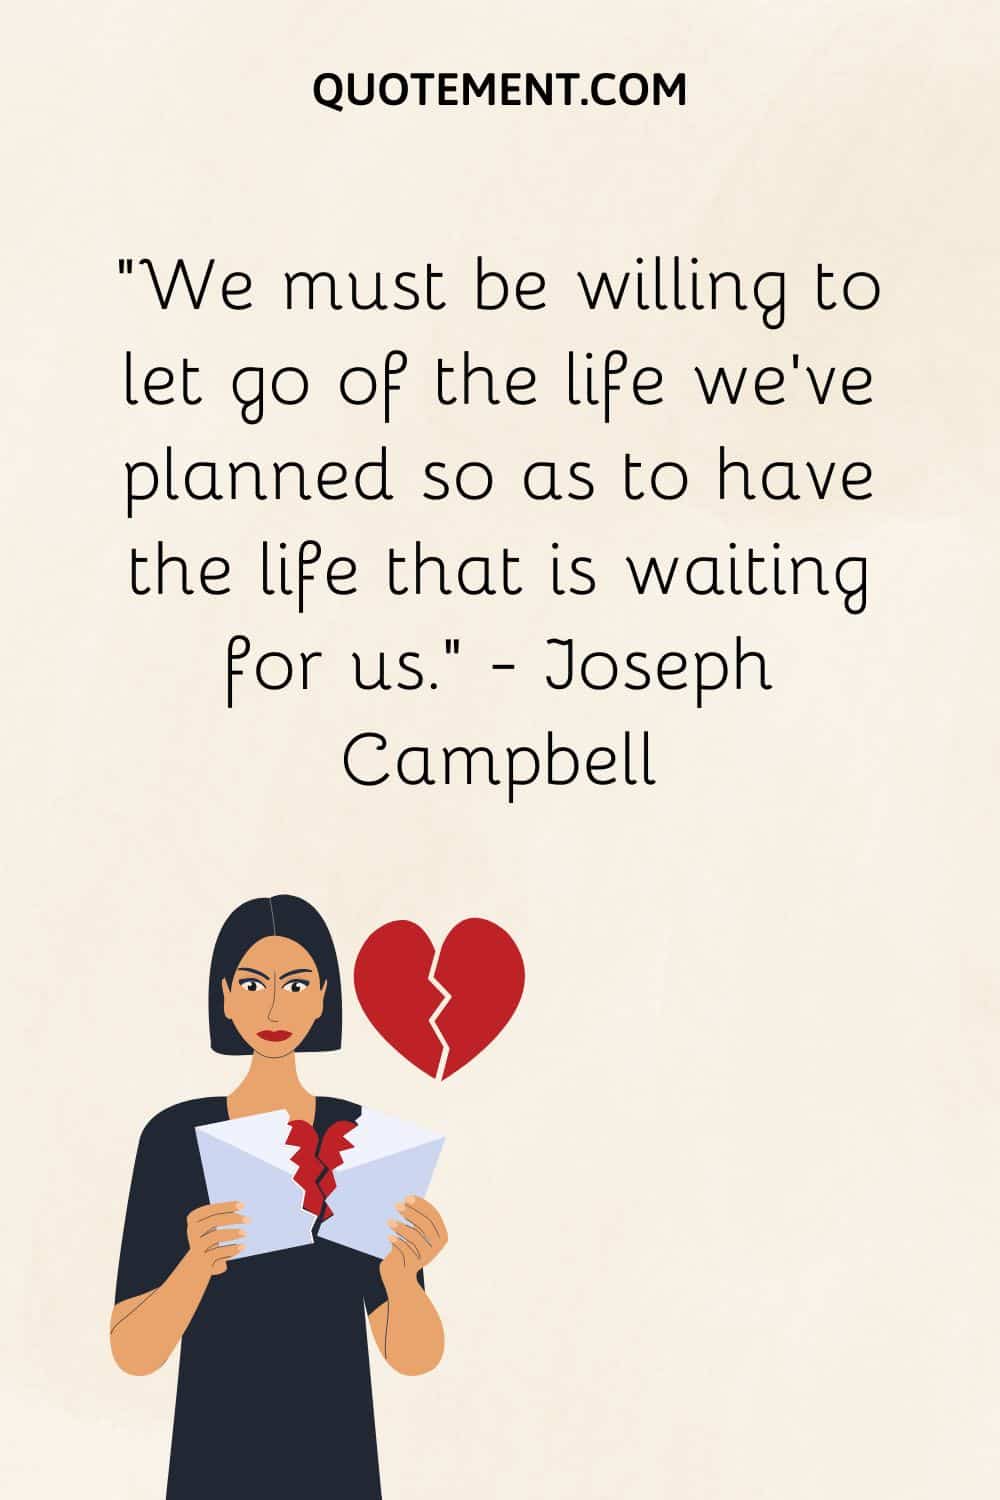 We must be willing to let go of the life we’ve planned so as to have the life that is waiting for us